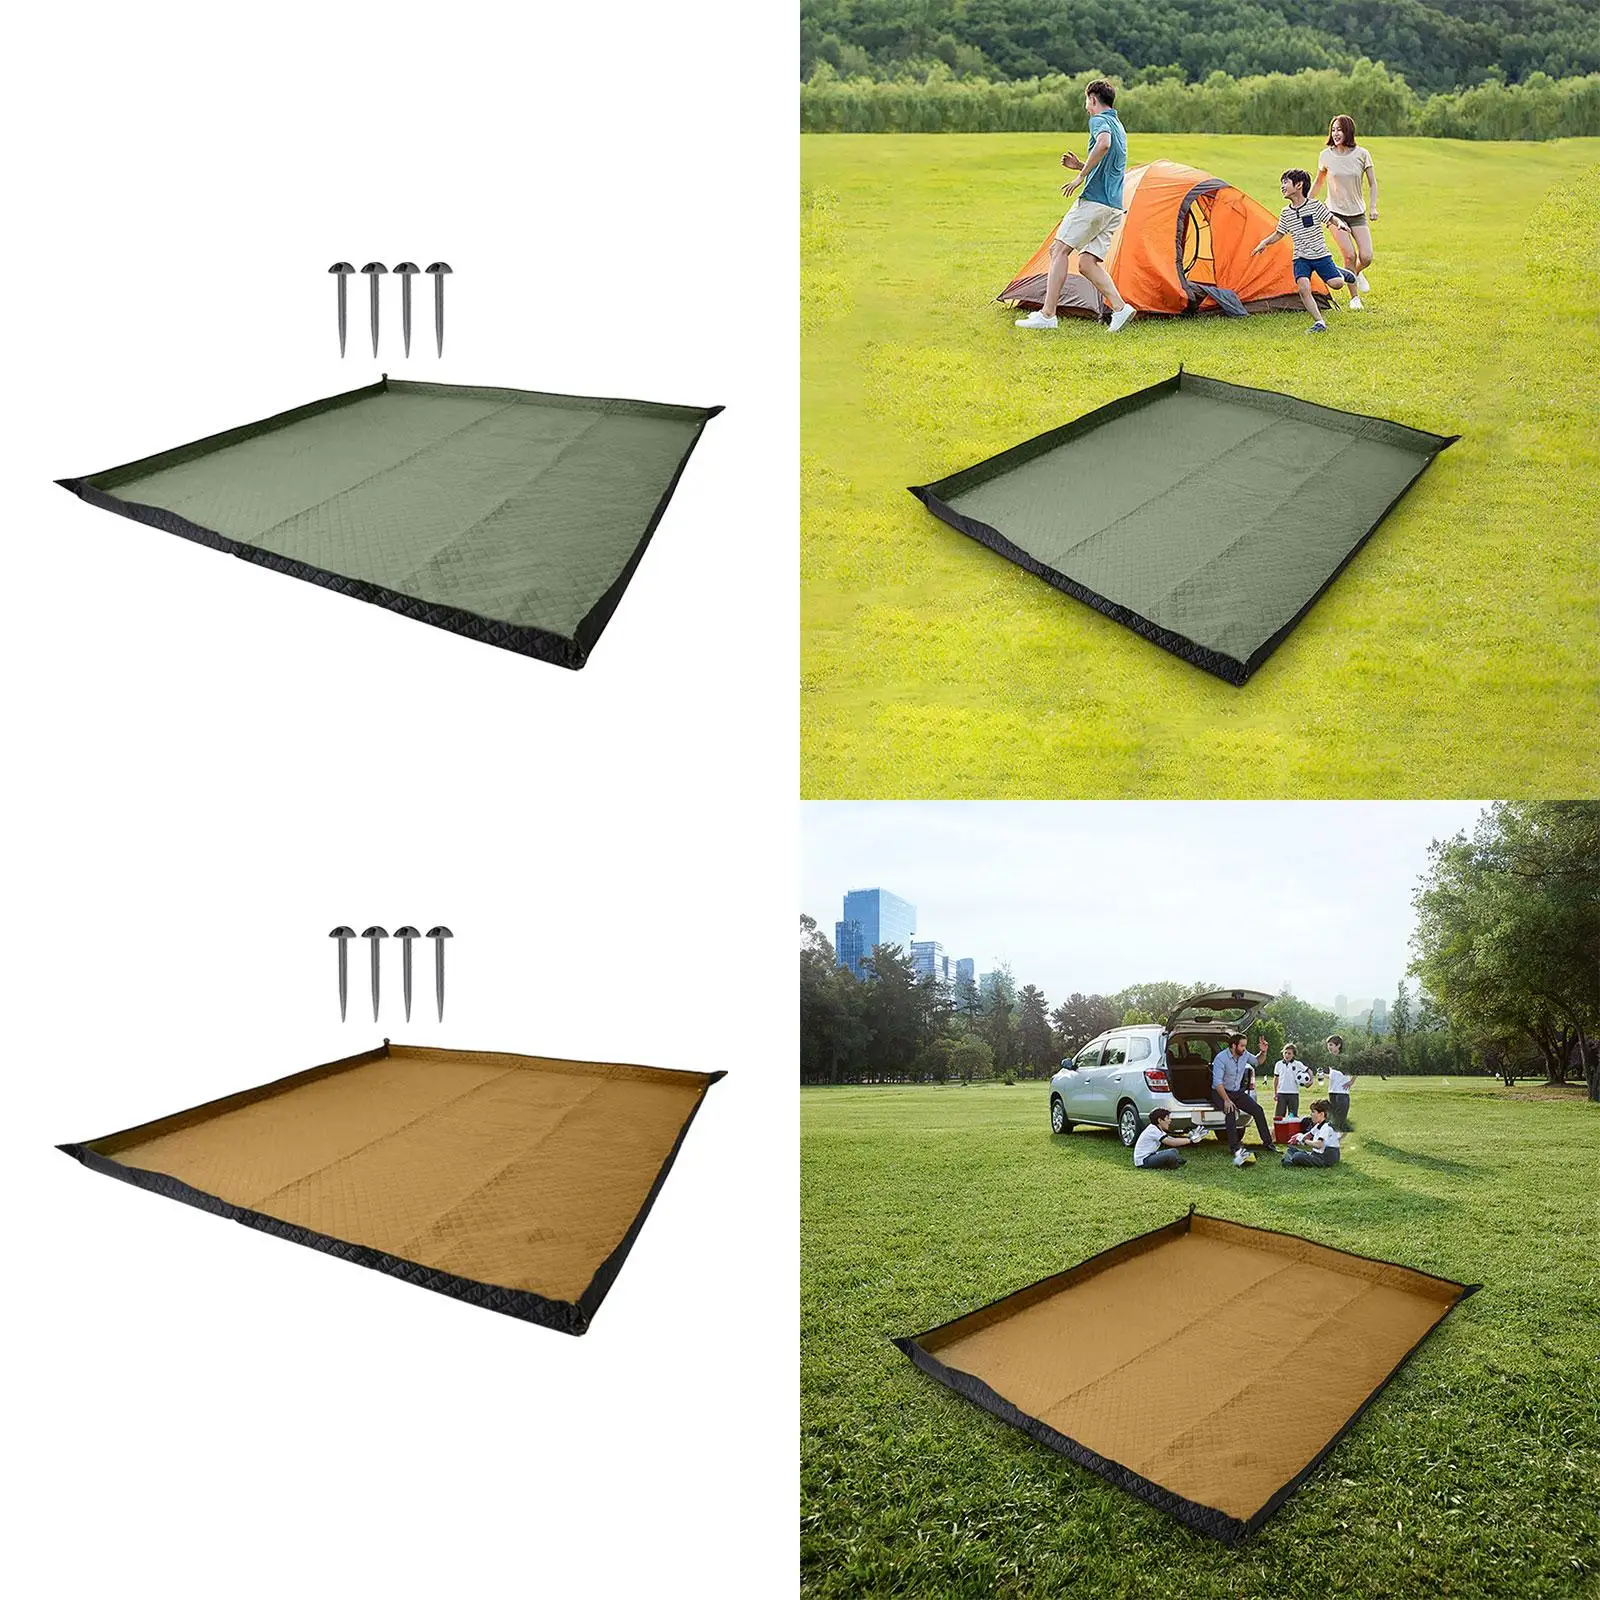 Camping Blanket, Sleeping Mat, Parking Blanket, with Carrying Strap, Tent Pad,